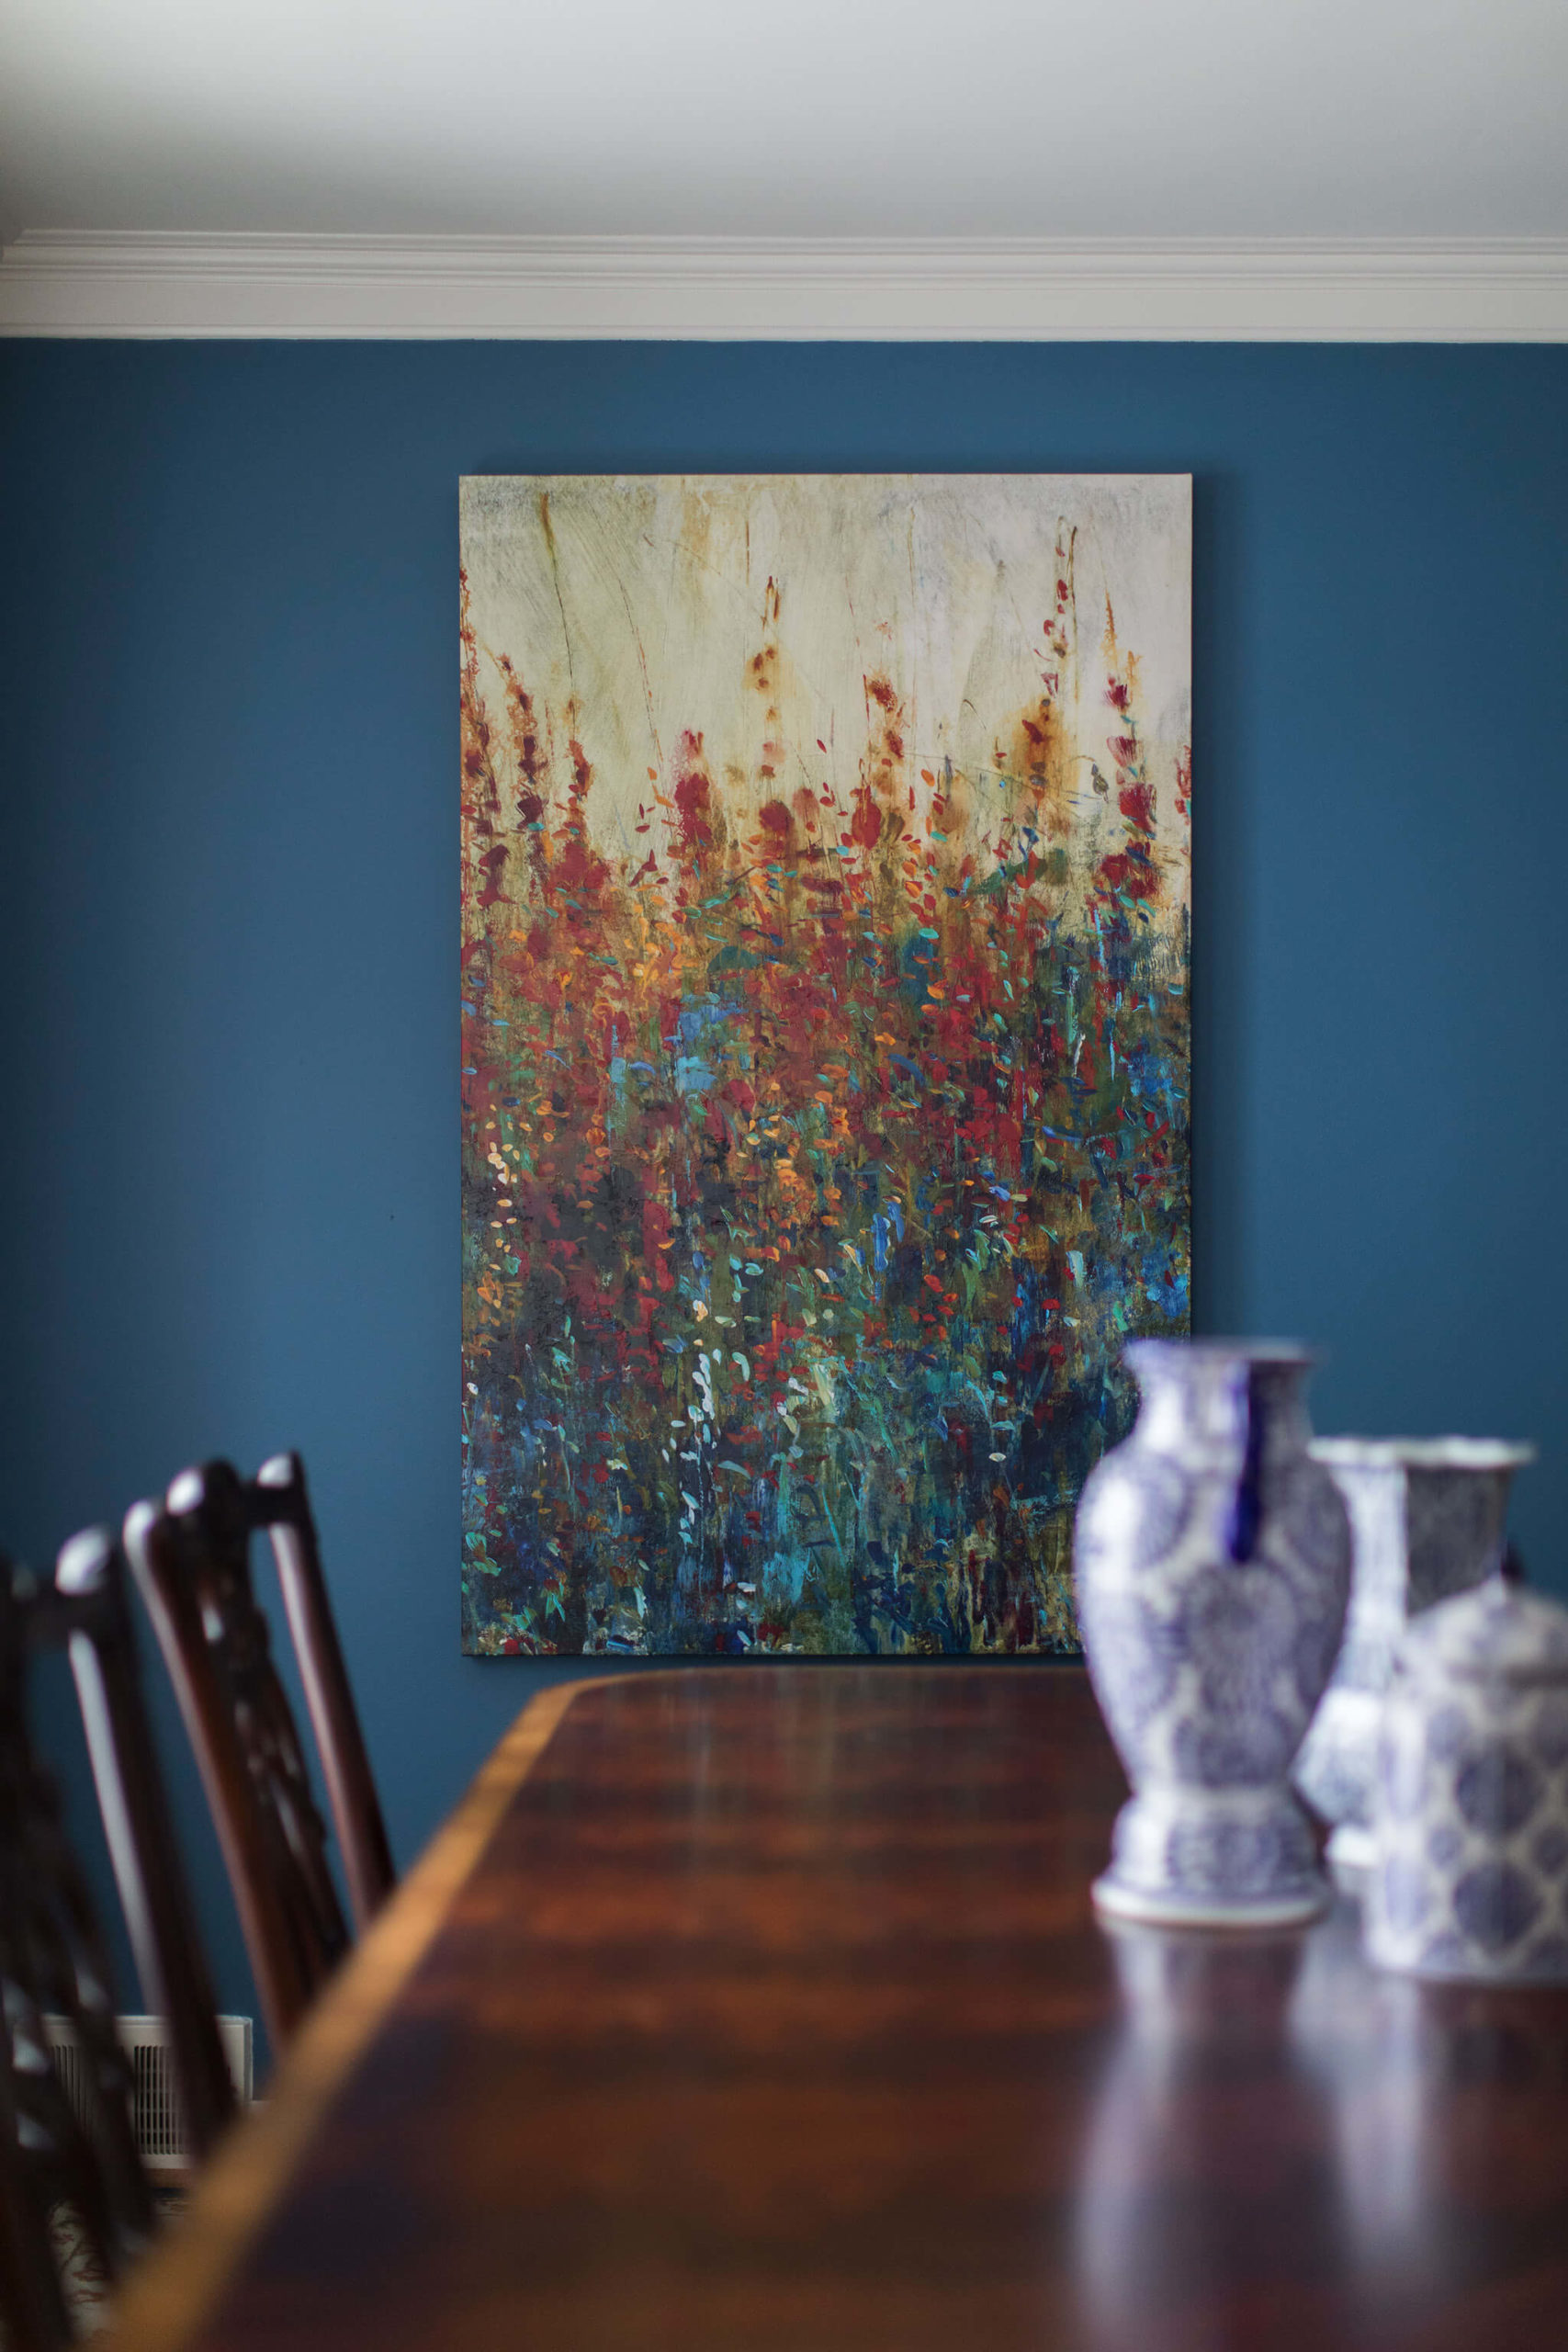 Colorful Dining Room Wall Art warmer tones interspersed with the blues and greens